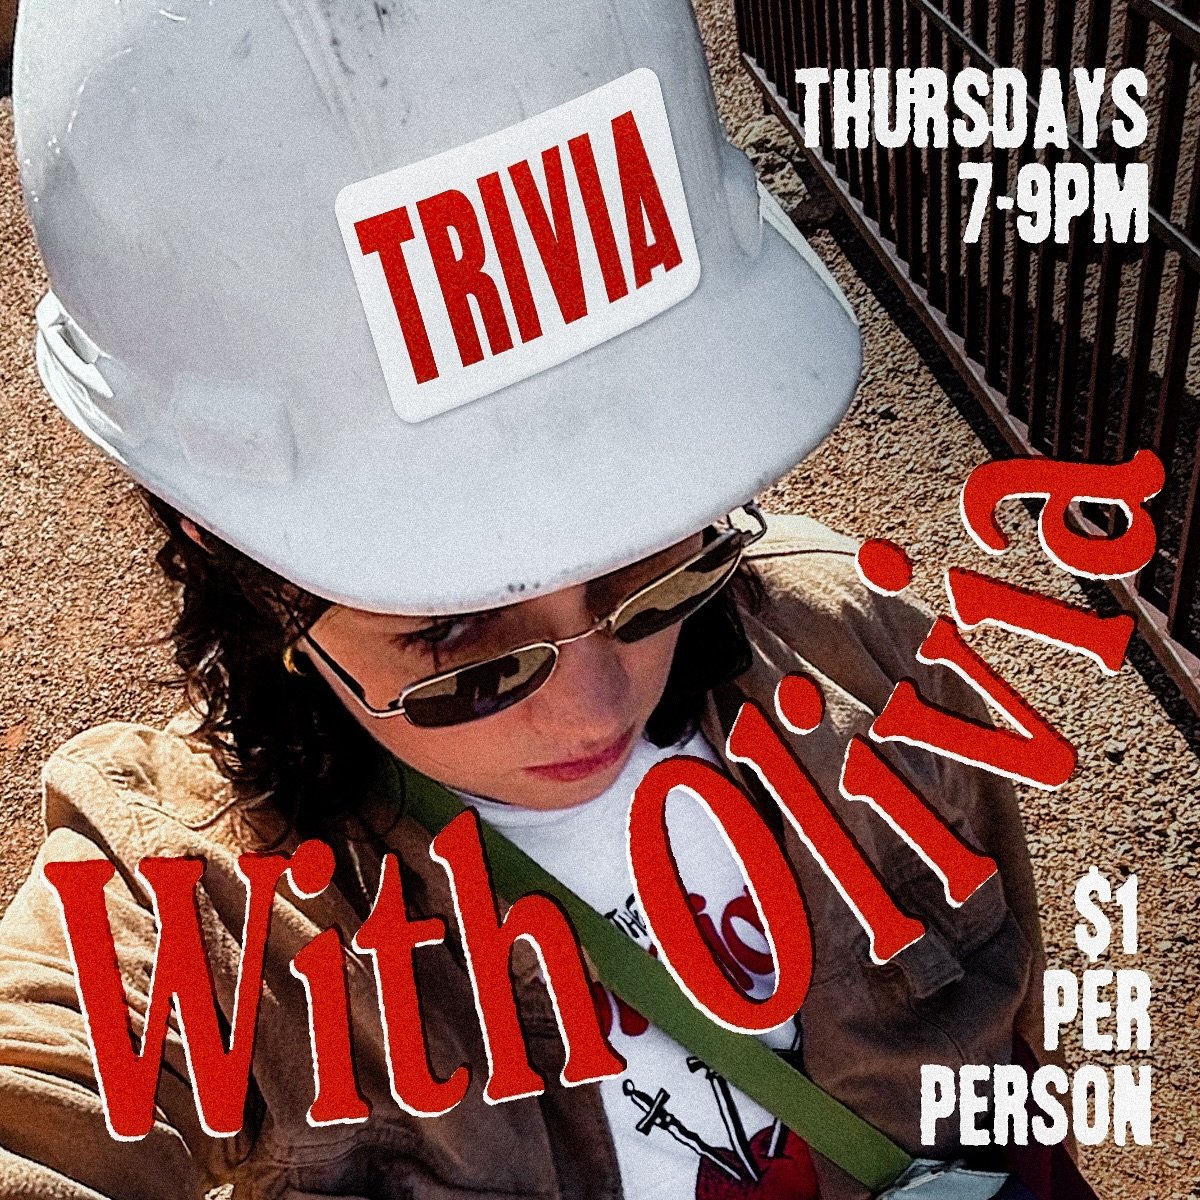 𝕋𝕣𝕚𝕧𝕚𝕒 𝕨𝕚𝕥𝕙 𝕆𝕝𝕚𝕧𝕚𝕒 is back for its second week!

Our favorite trivia superstar returns with our new weekly Trivia timeslot, featuring categories carefully crafted to put you to the test.

$1 per player, prizes given for first place, s